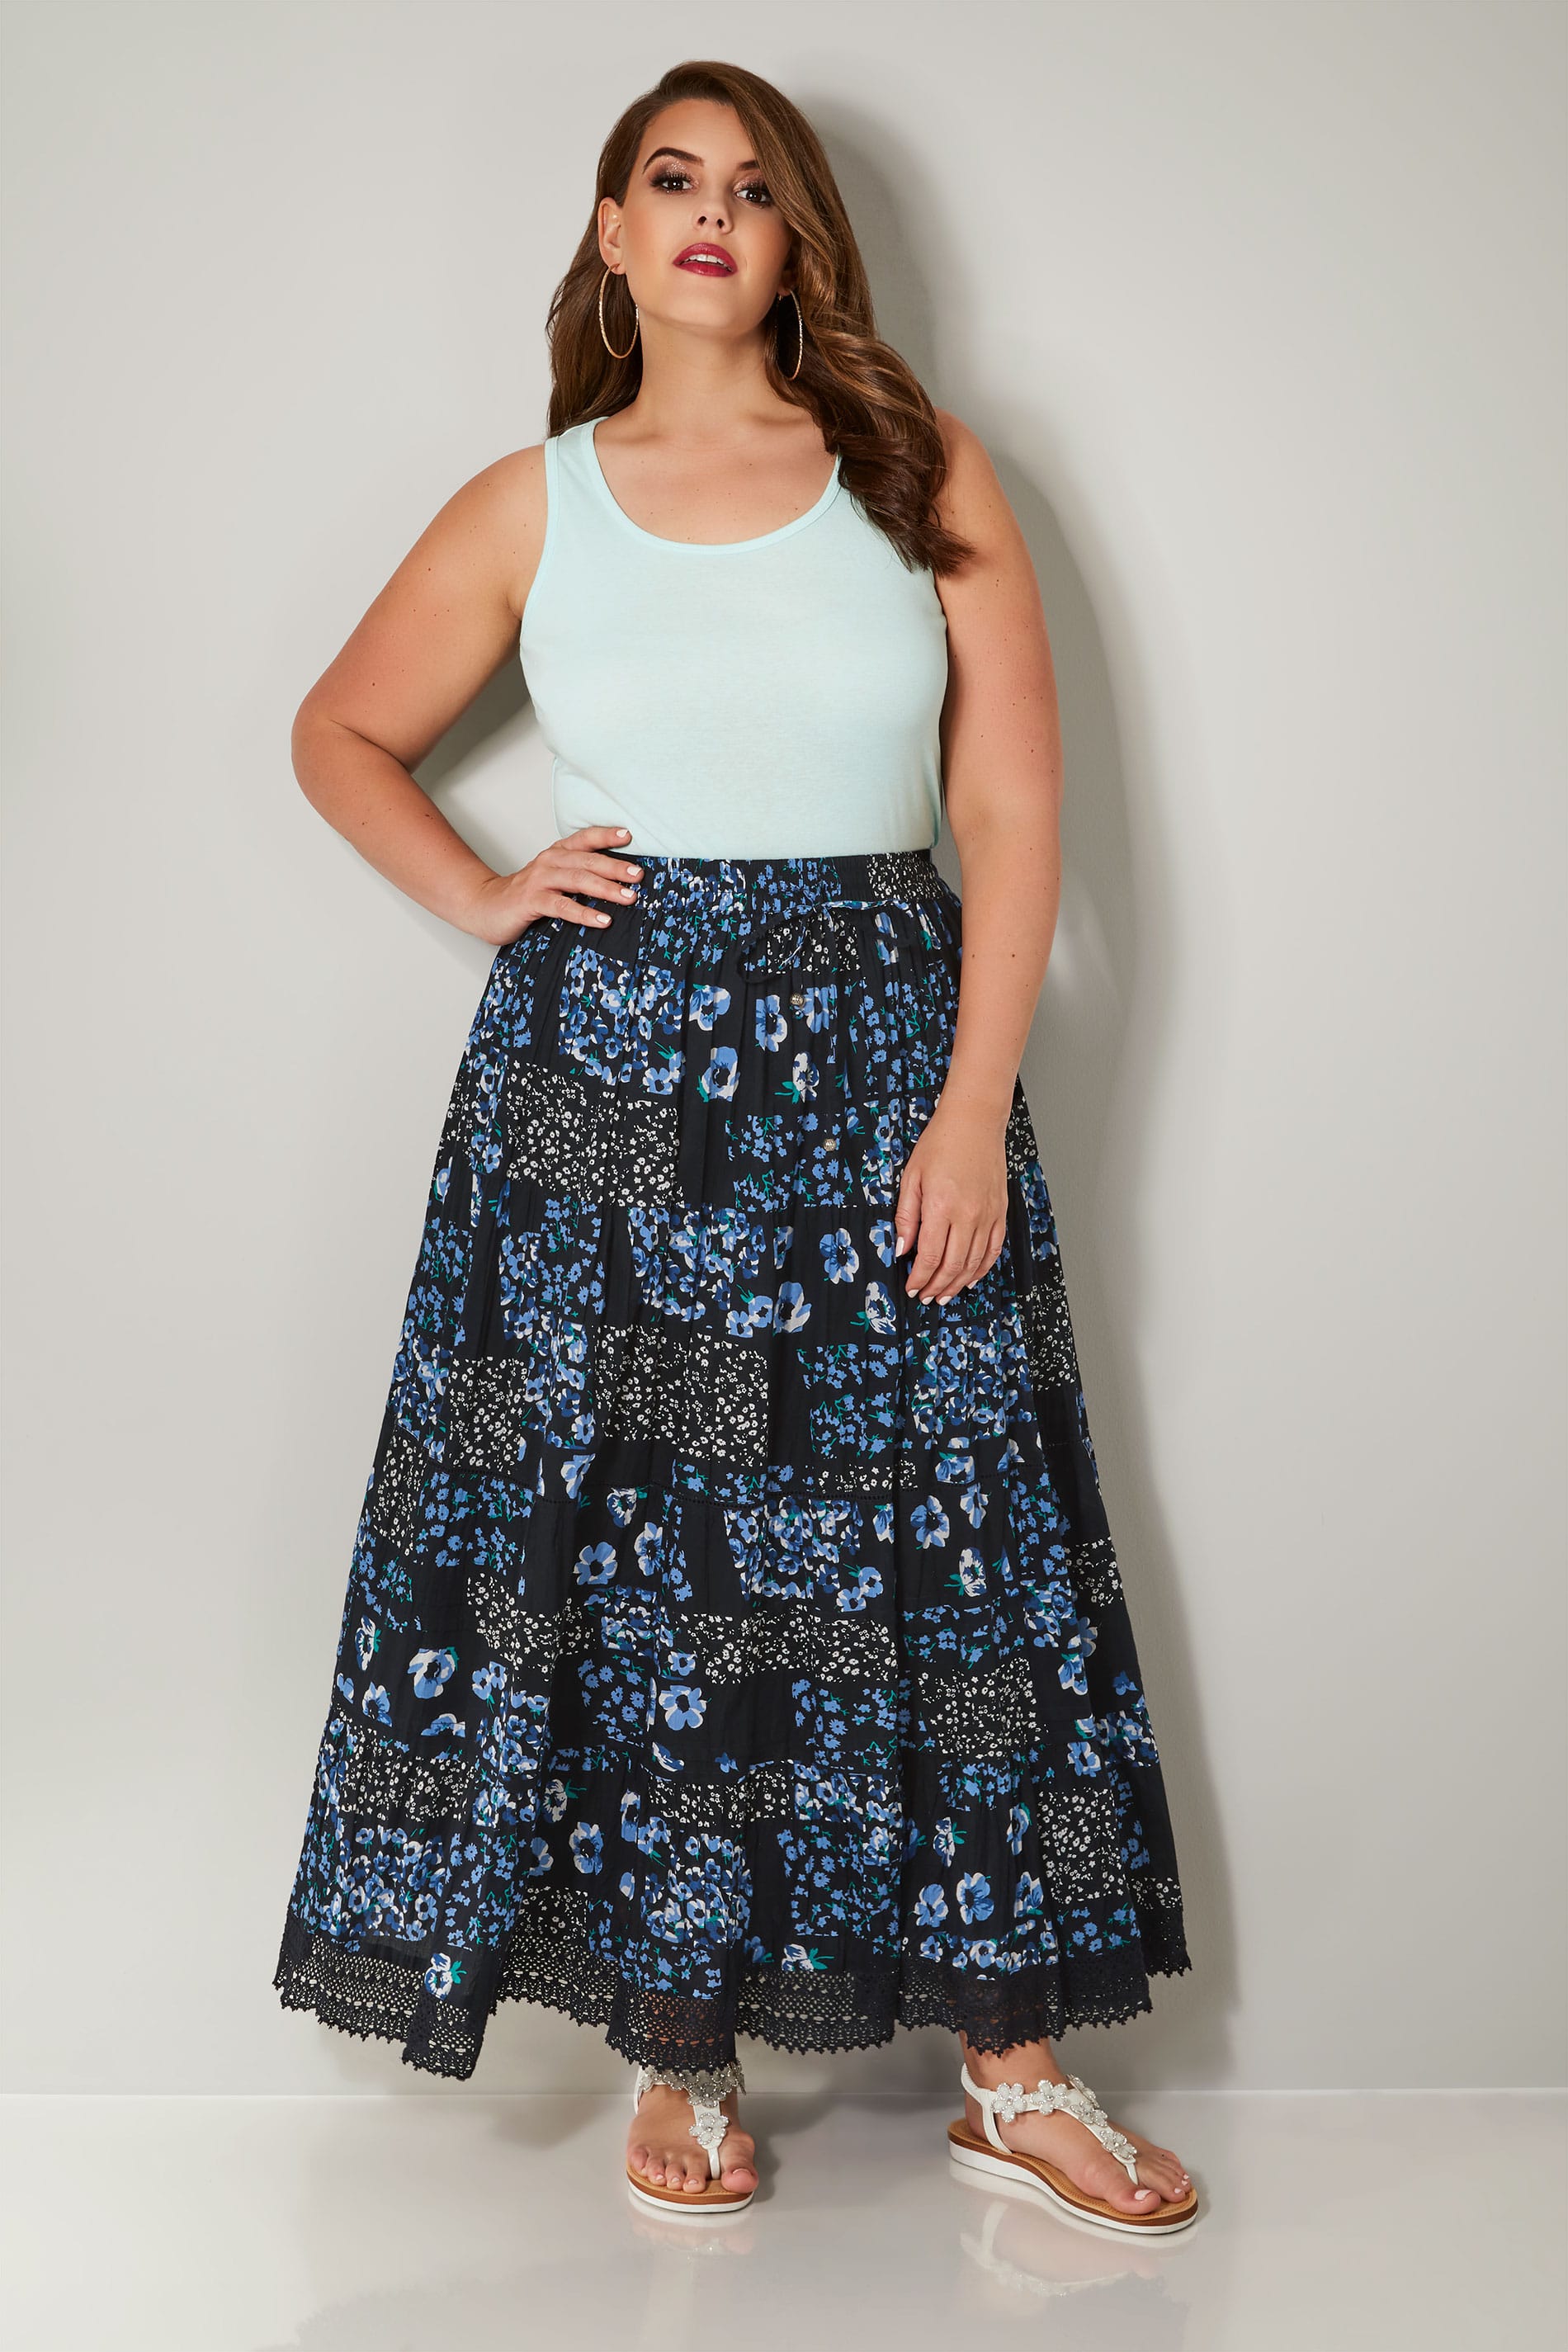 Navy Floral Print Tiered Maxi Skirt With Lace Trim Hem, plus size 16 to 36